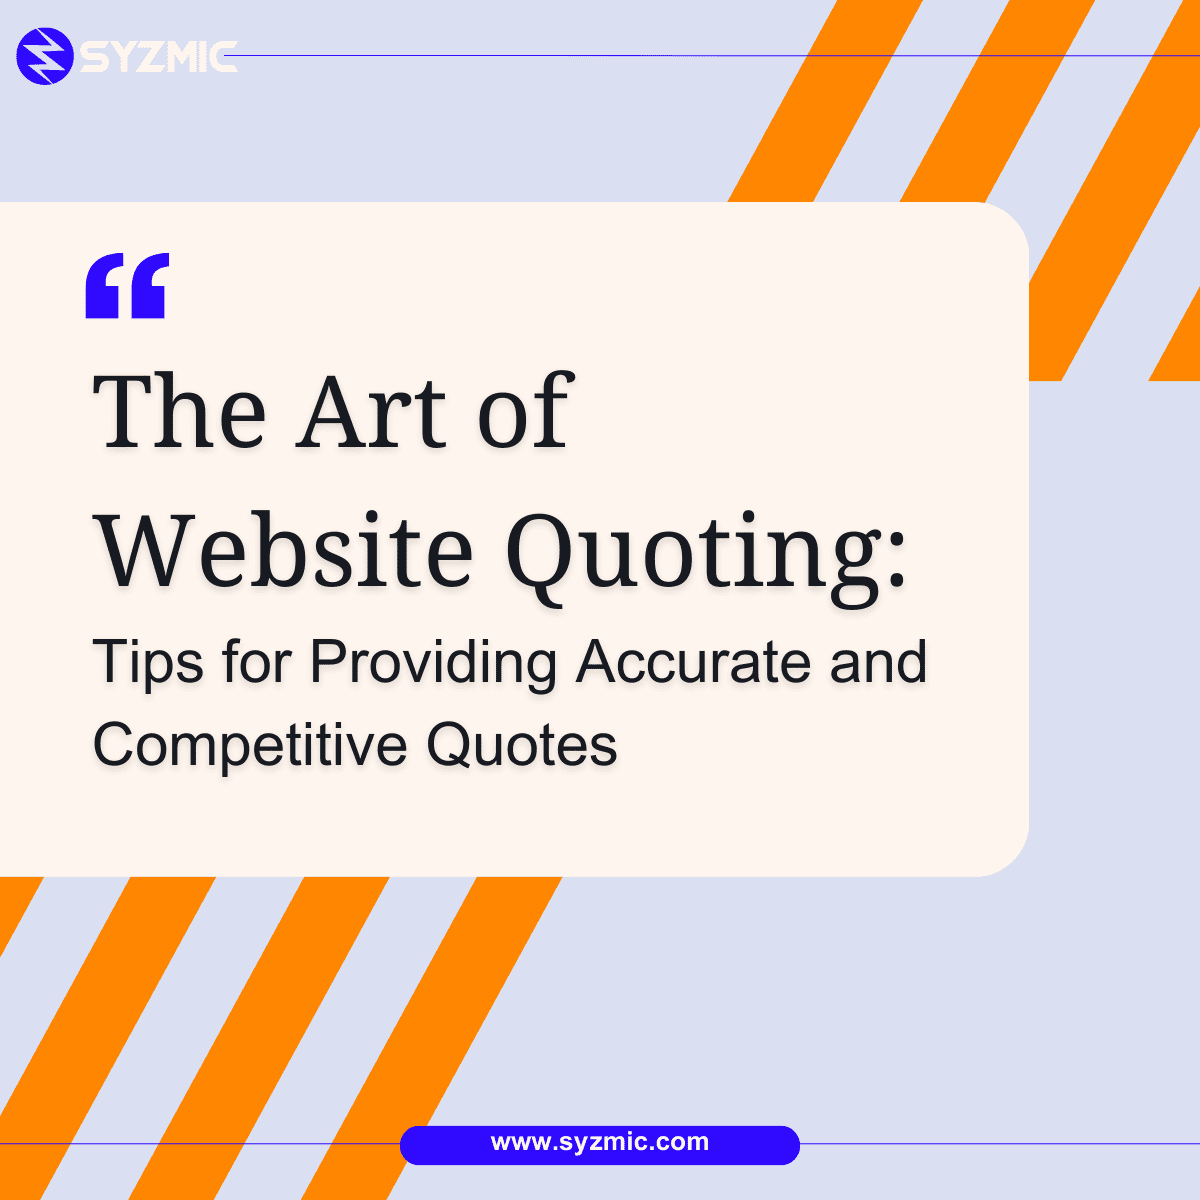 The Art of Website Quoting: Tips for Providing Accurate and Competitive Quotes